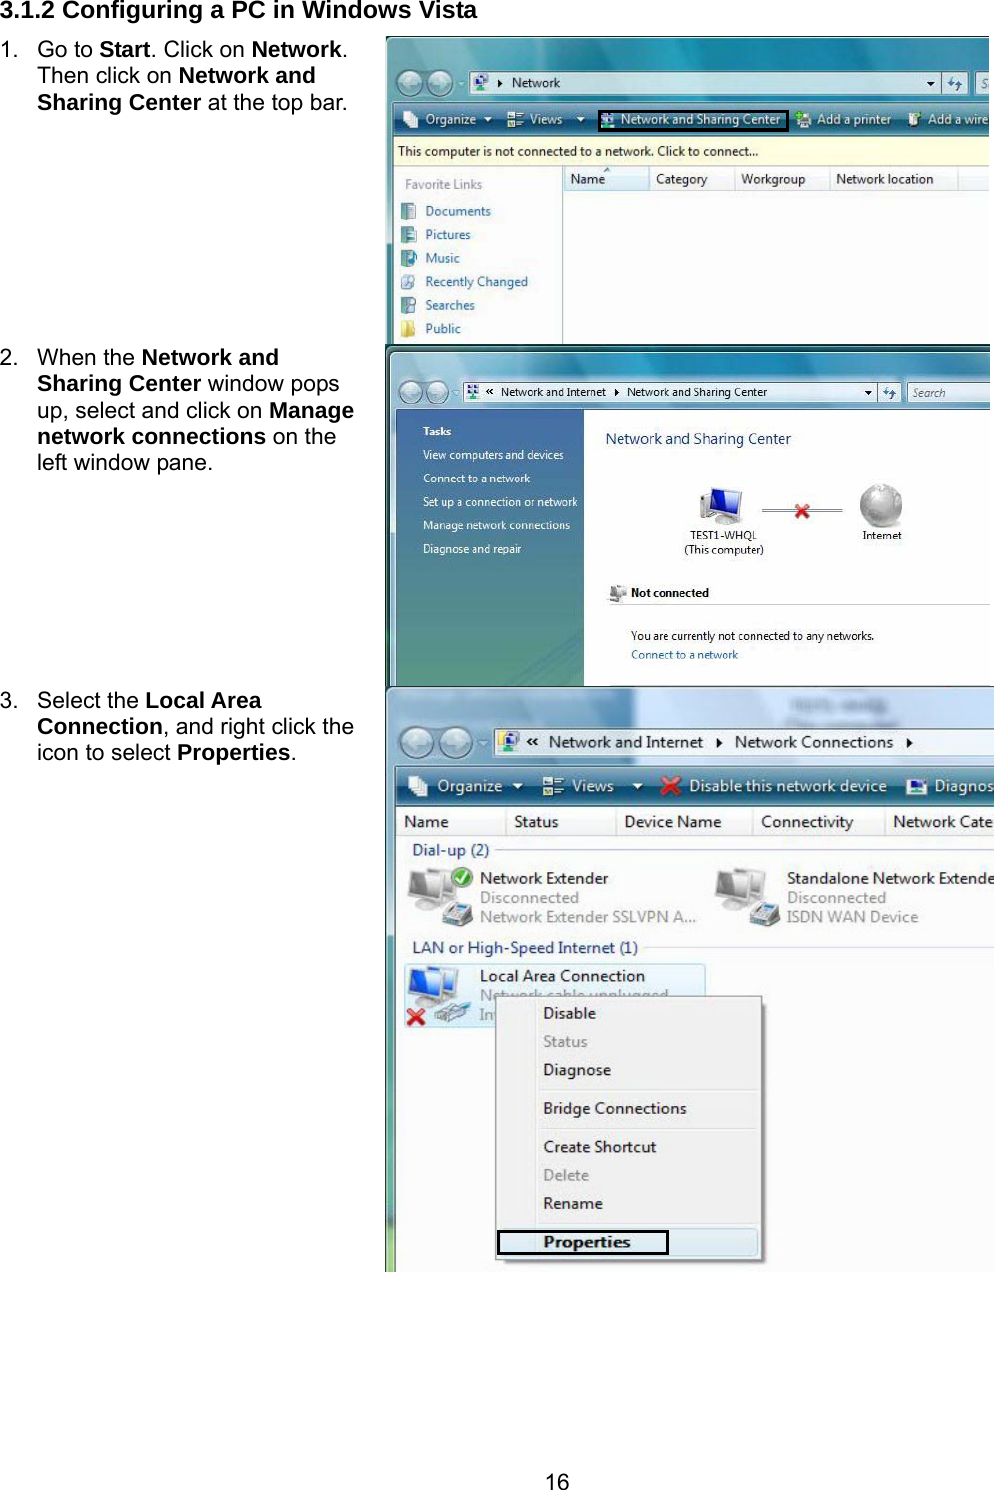 16 3.1.2 Configuring a PC in Windows Vista 1. Go to Start. Click on Network. Then click on Network and Sharing Center at the top bar. 2. When the Network and Sharing Center window pops up, select and click on Manage network connections on the left window pane. 3. Select the Local Area Connection, and right click the icon to select Properties.      